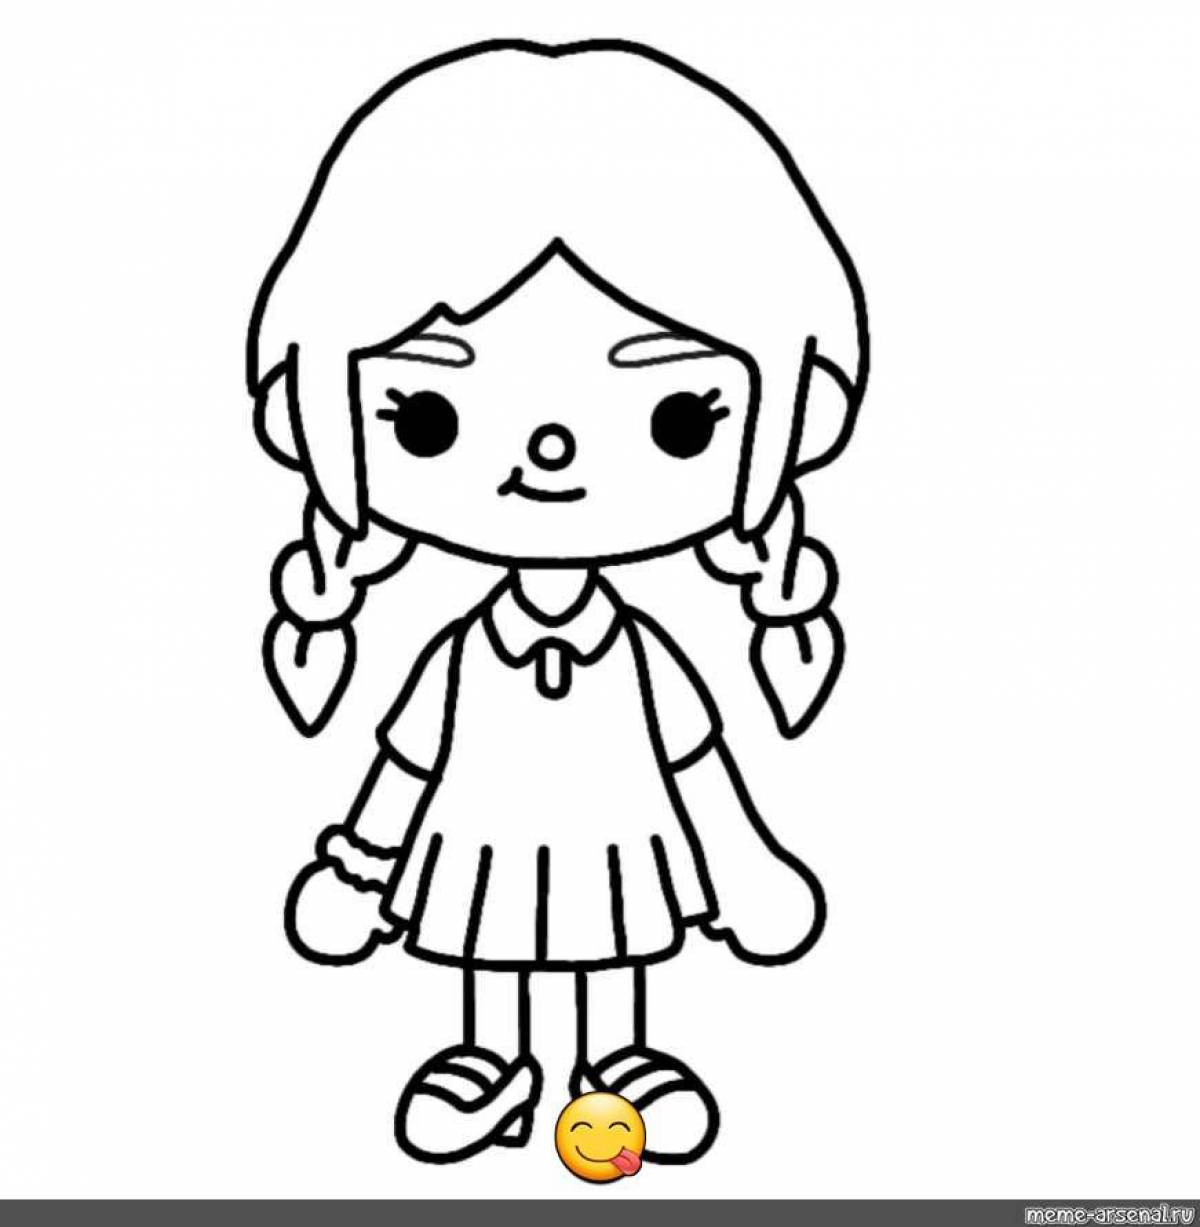 Bold boca clothes coloring page